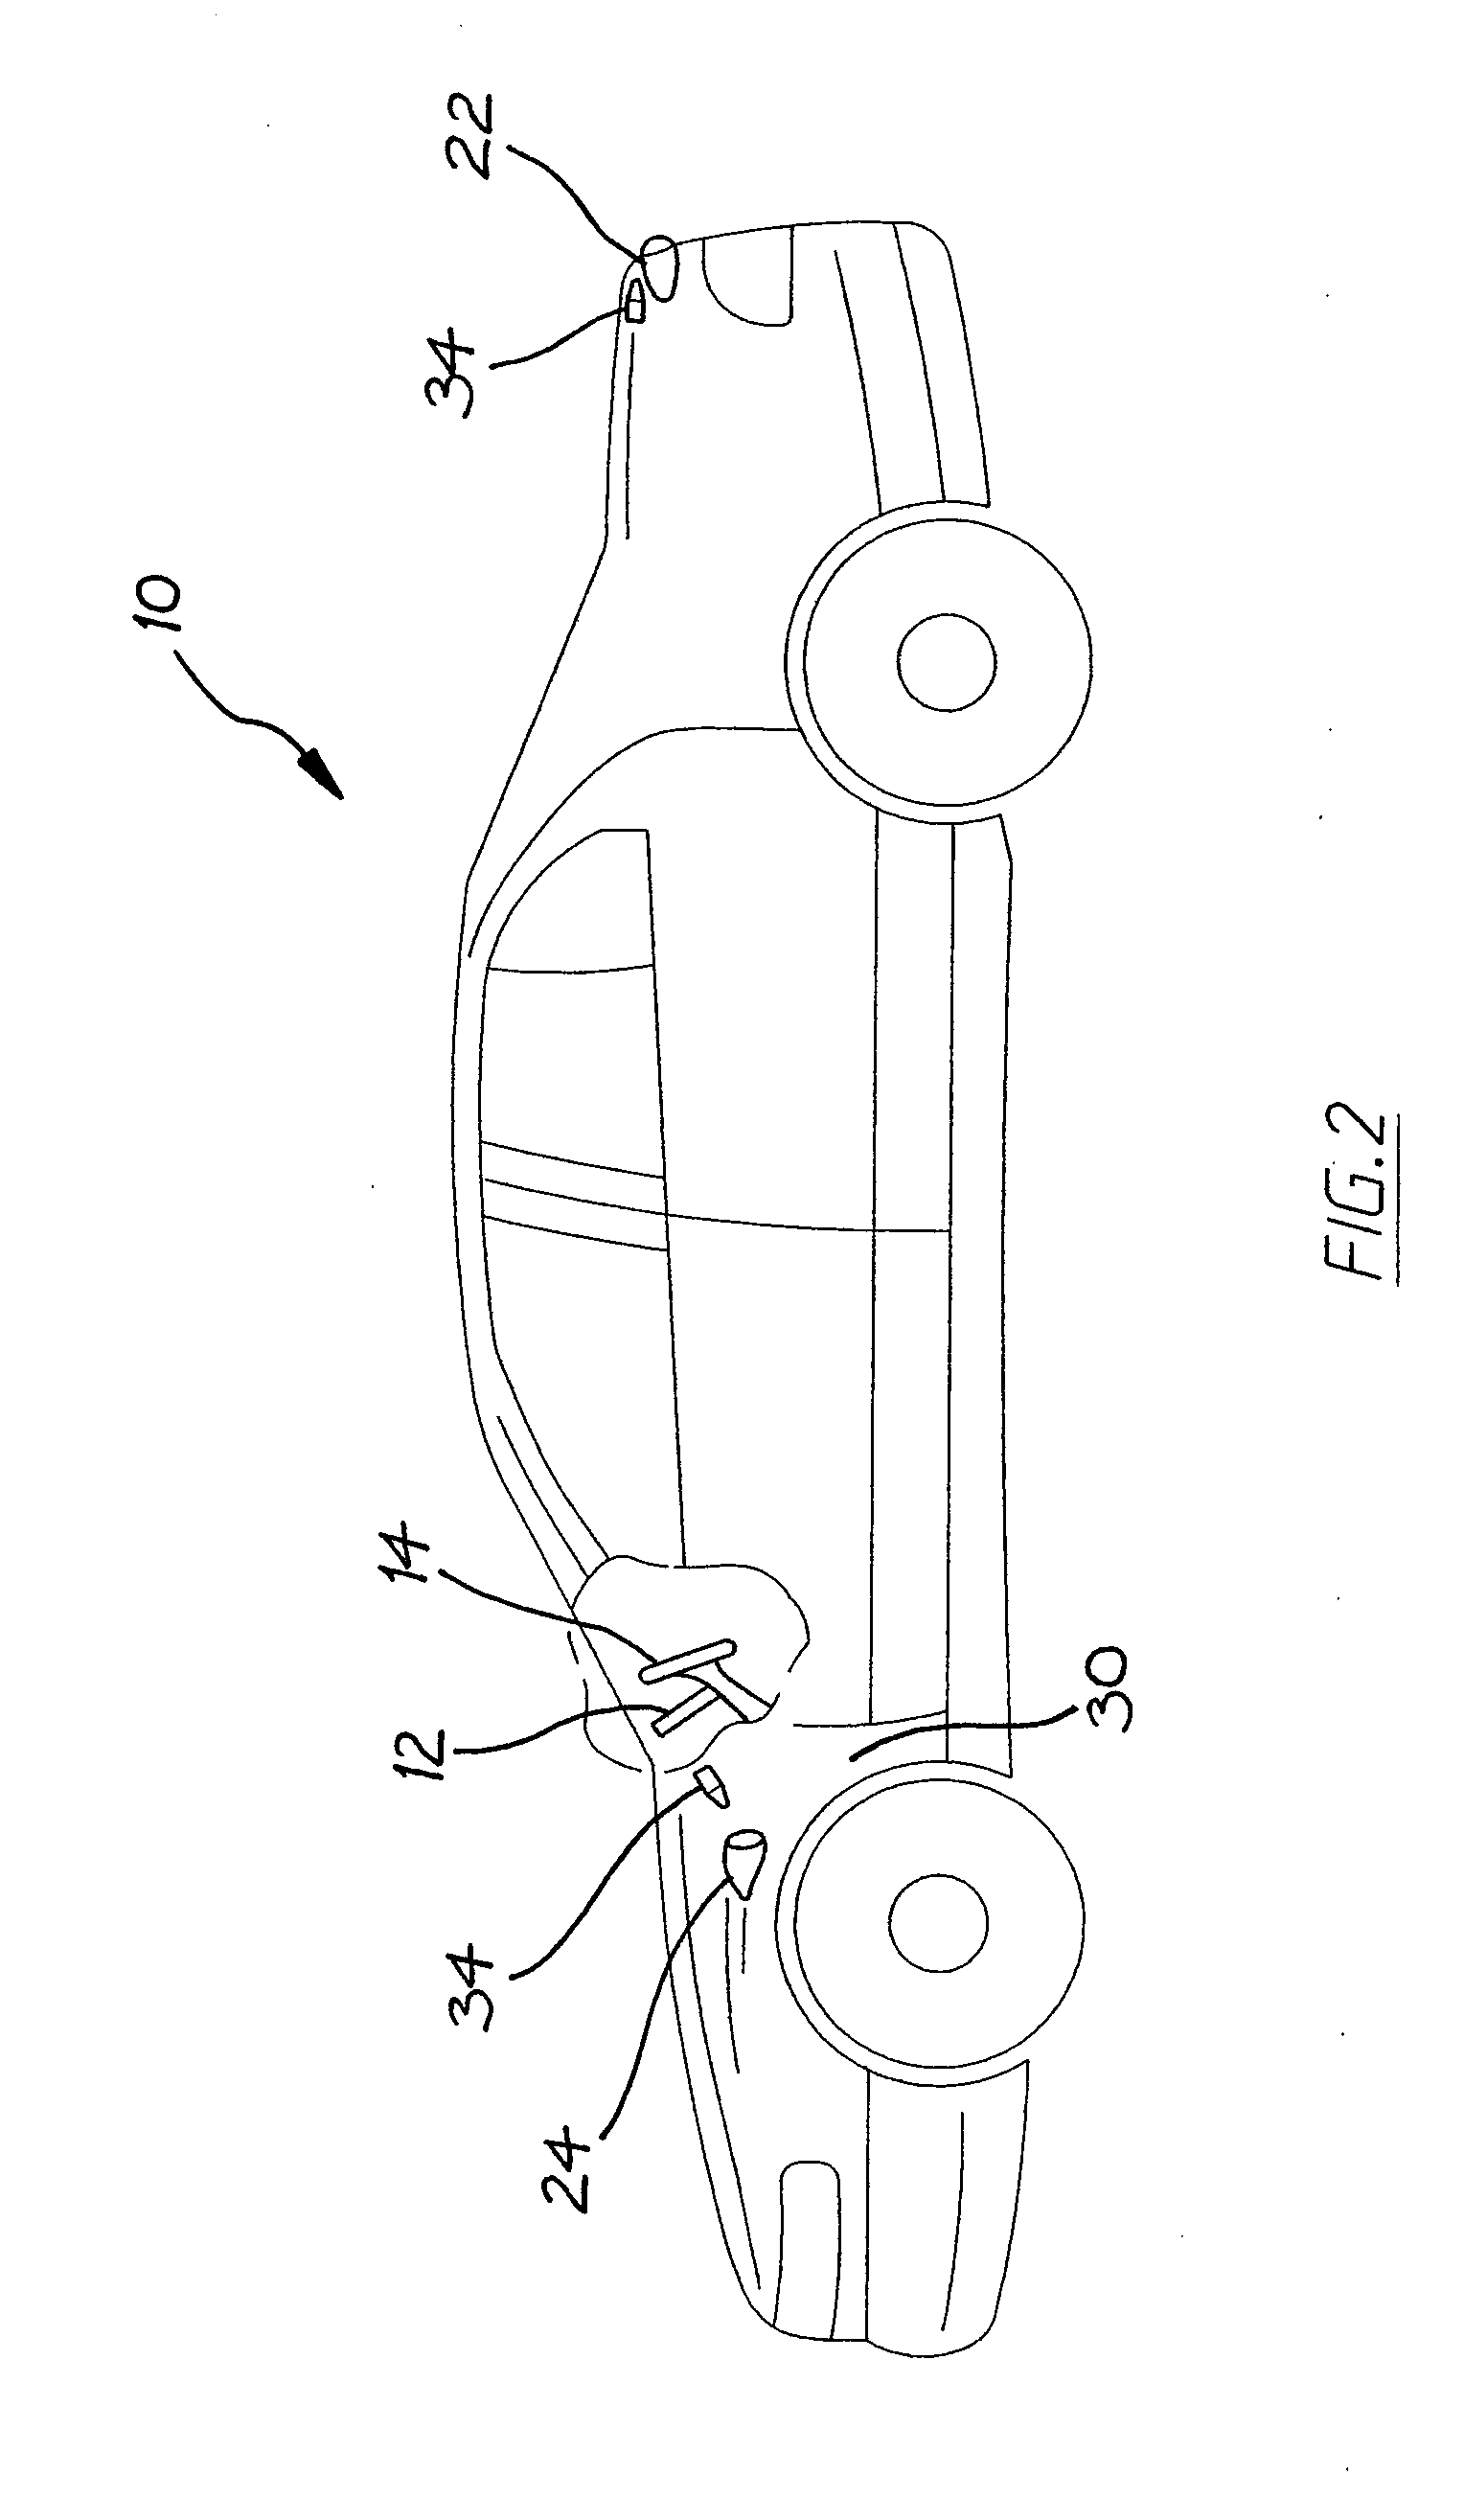 Rear Vision Video Camera and Display Screen System for a Vehicle